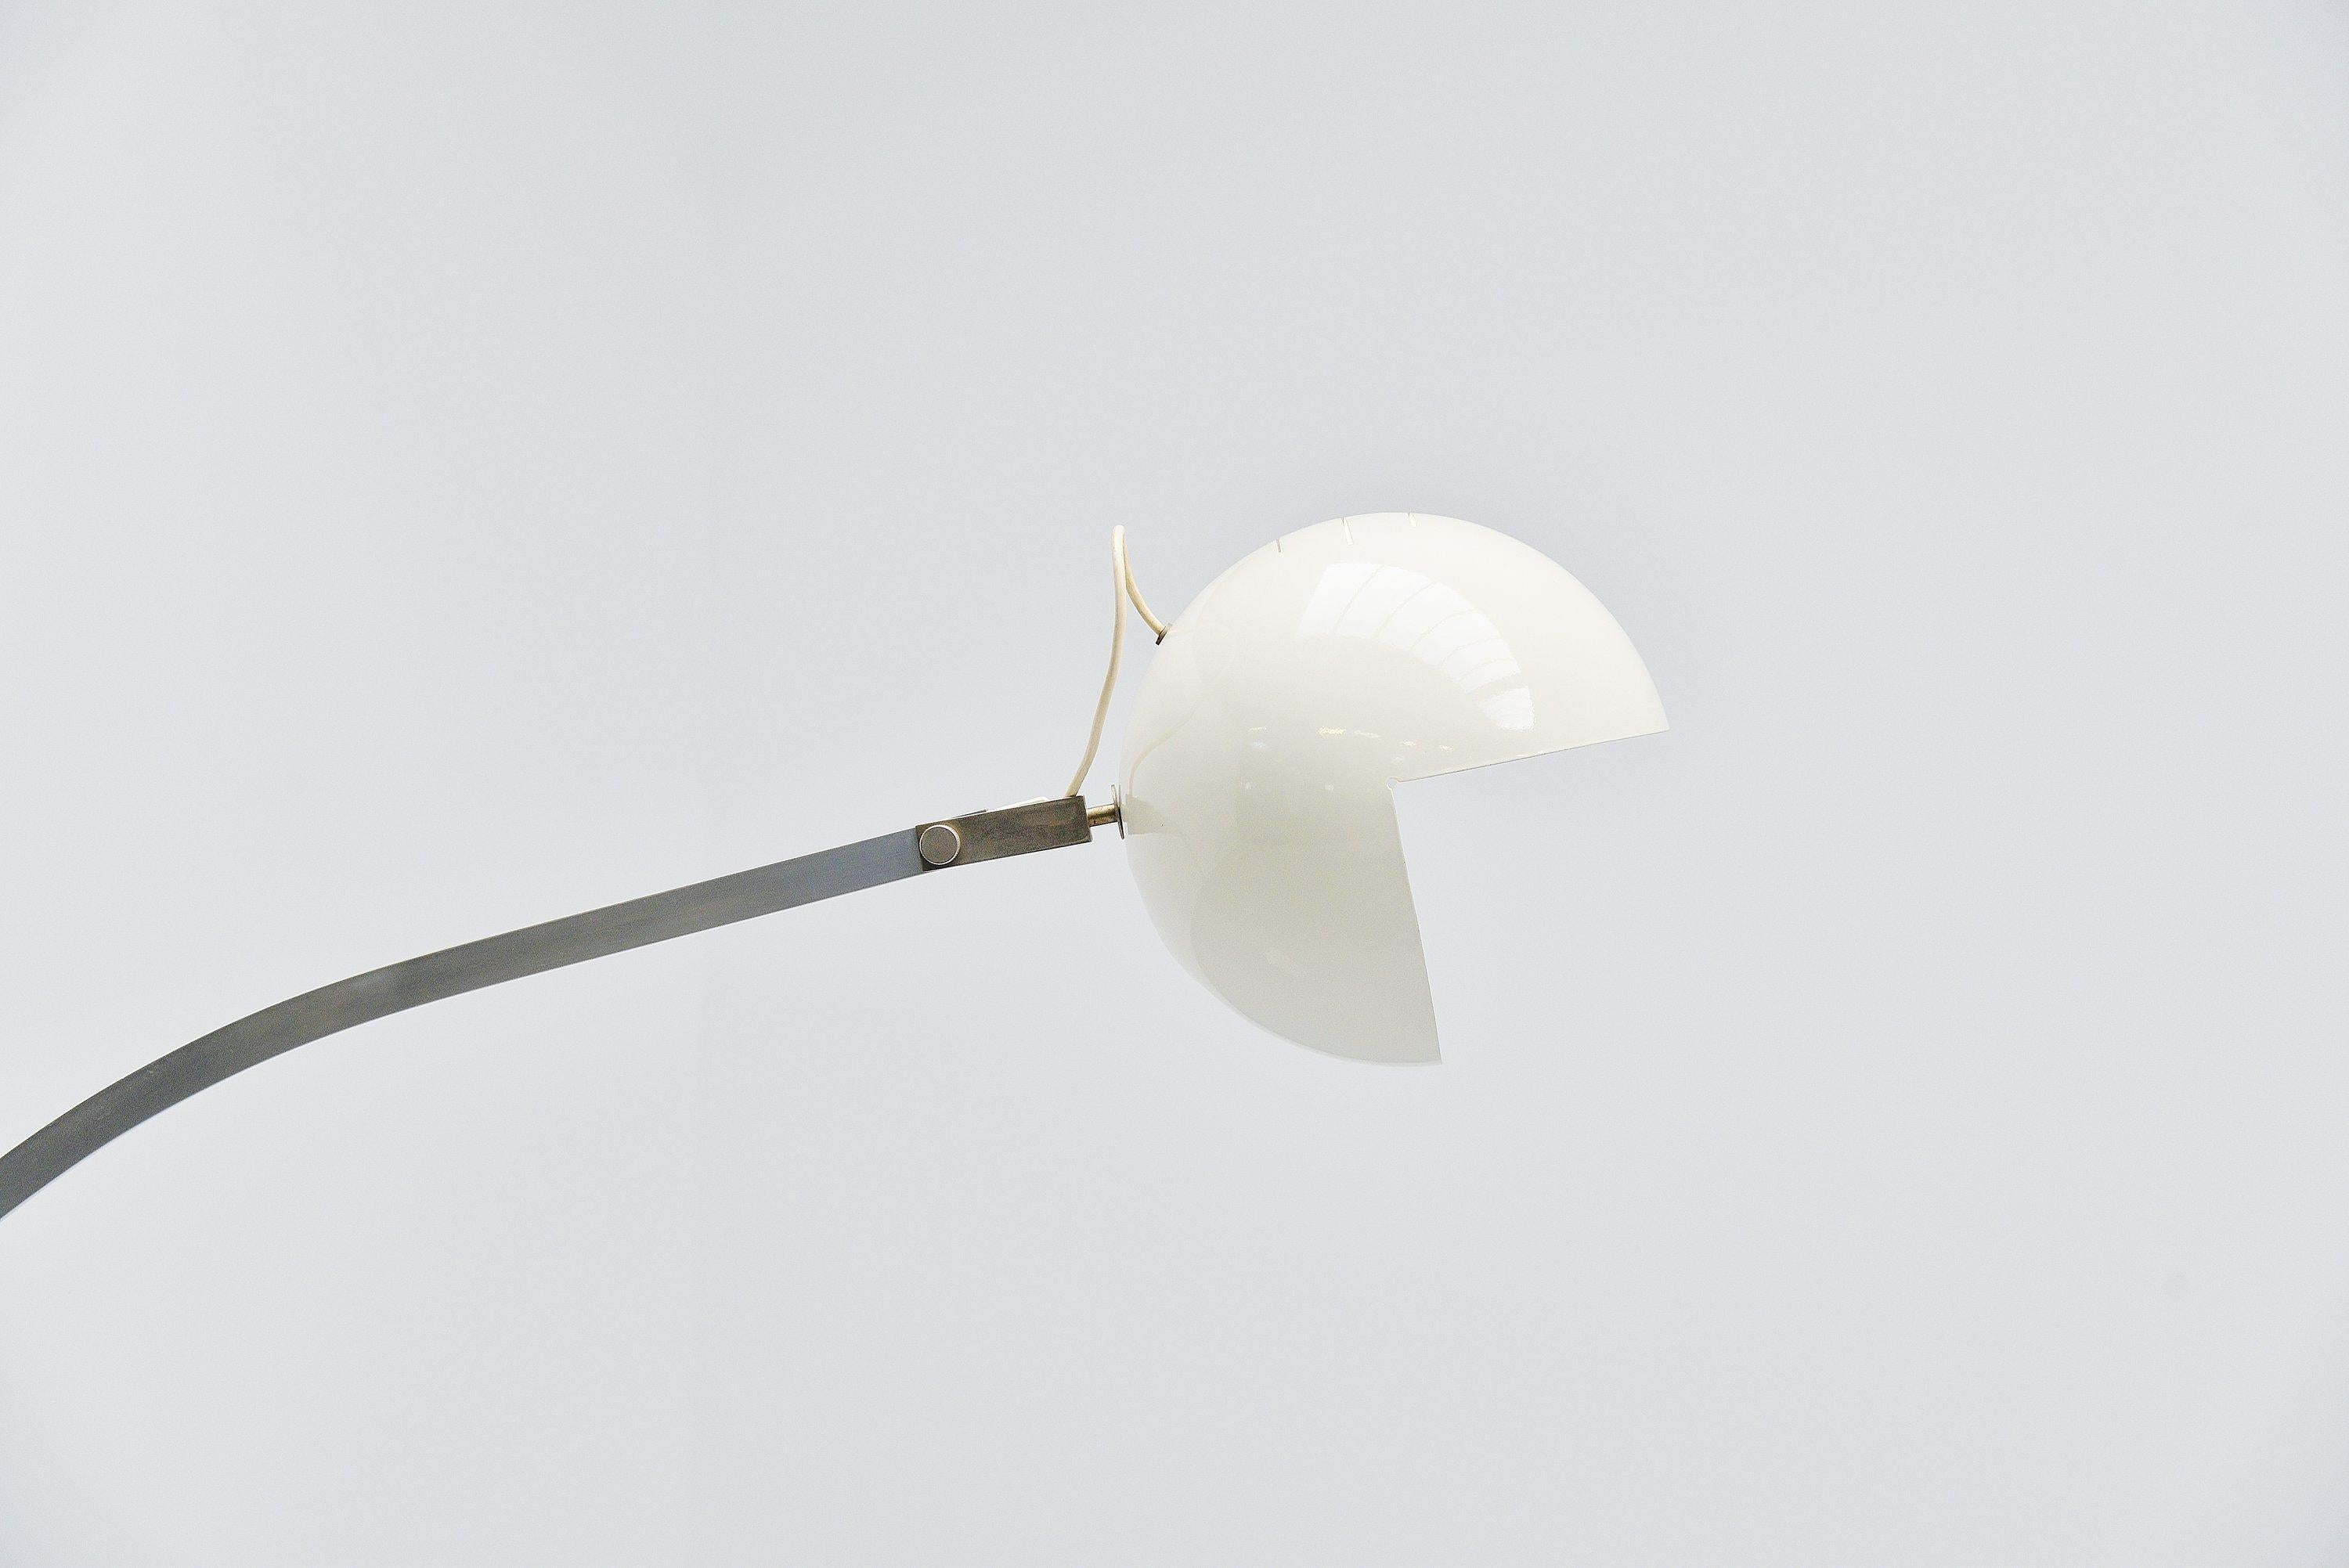 Pacman shaped floor lamp designed and manufactured by ILL-Form, Italy 1965. The lamp has a solid metal base, white painted. An aluminium bow arm and round packman shaped shade. The shade is adjustable. Very nice shaped floor lamp made by this small